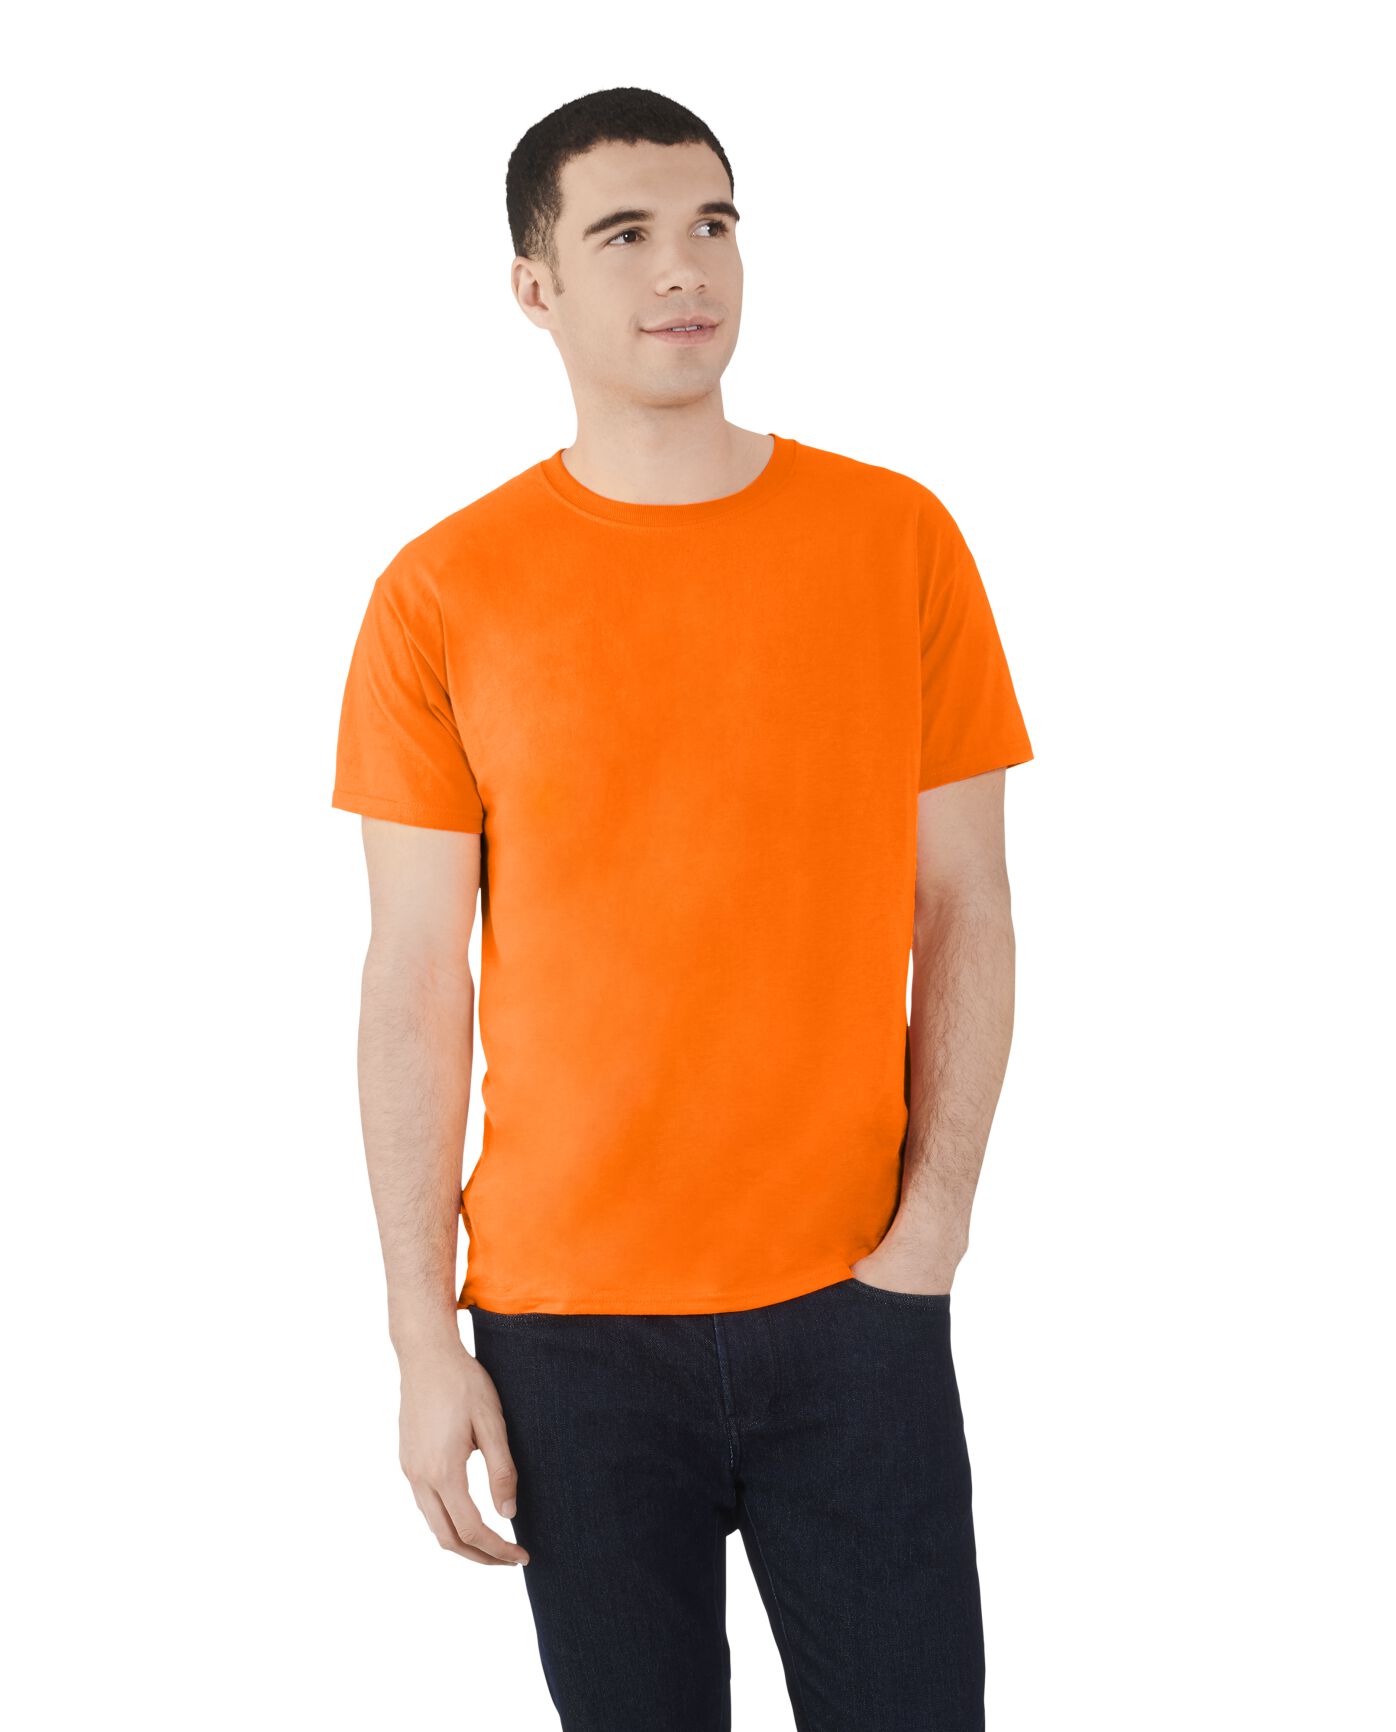 AMERICAN PLAIN ORANGE T-SHIRT- MEMORABLE GIFT OF TOP QUALITY-LOWEST PRICE GAURANTEED-DO NOT MISS THIS CHANCE-FREE HOME(POST OFFICE) DELIVERY-ART. NO. 5000-REA 28%?